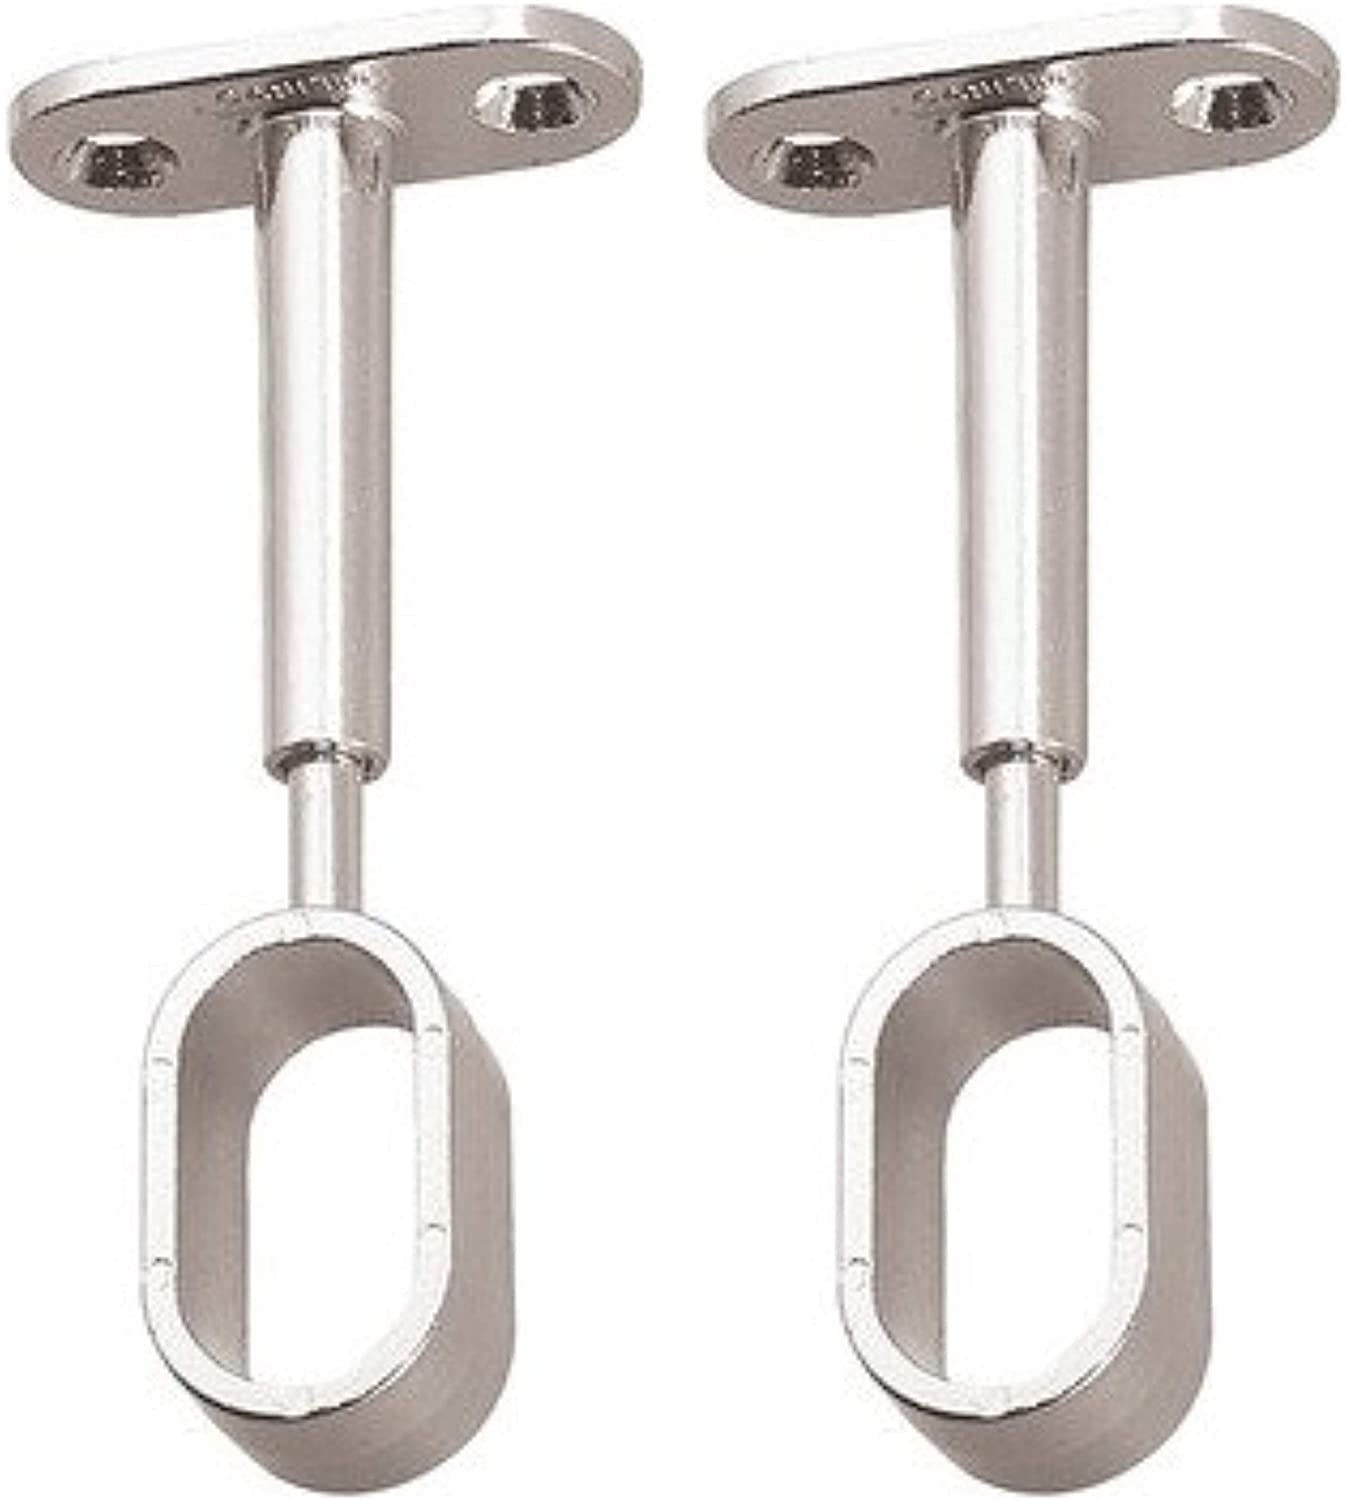 Oval Wardrobe Rail Centre Supports Brackets 15mm Height Adjustable Polished Chrome